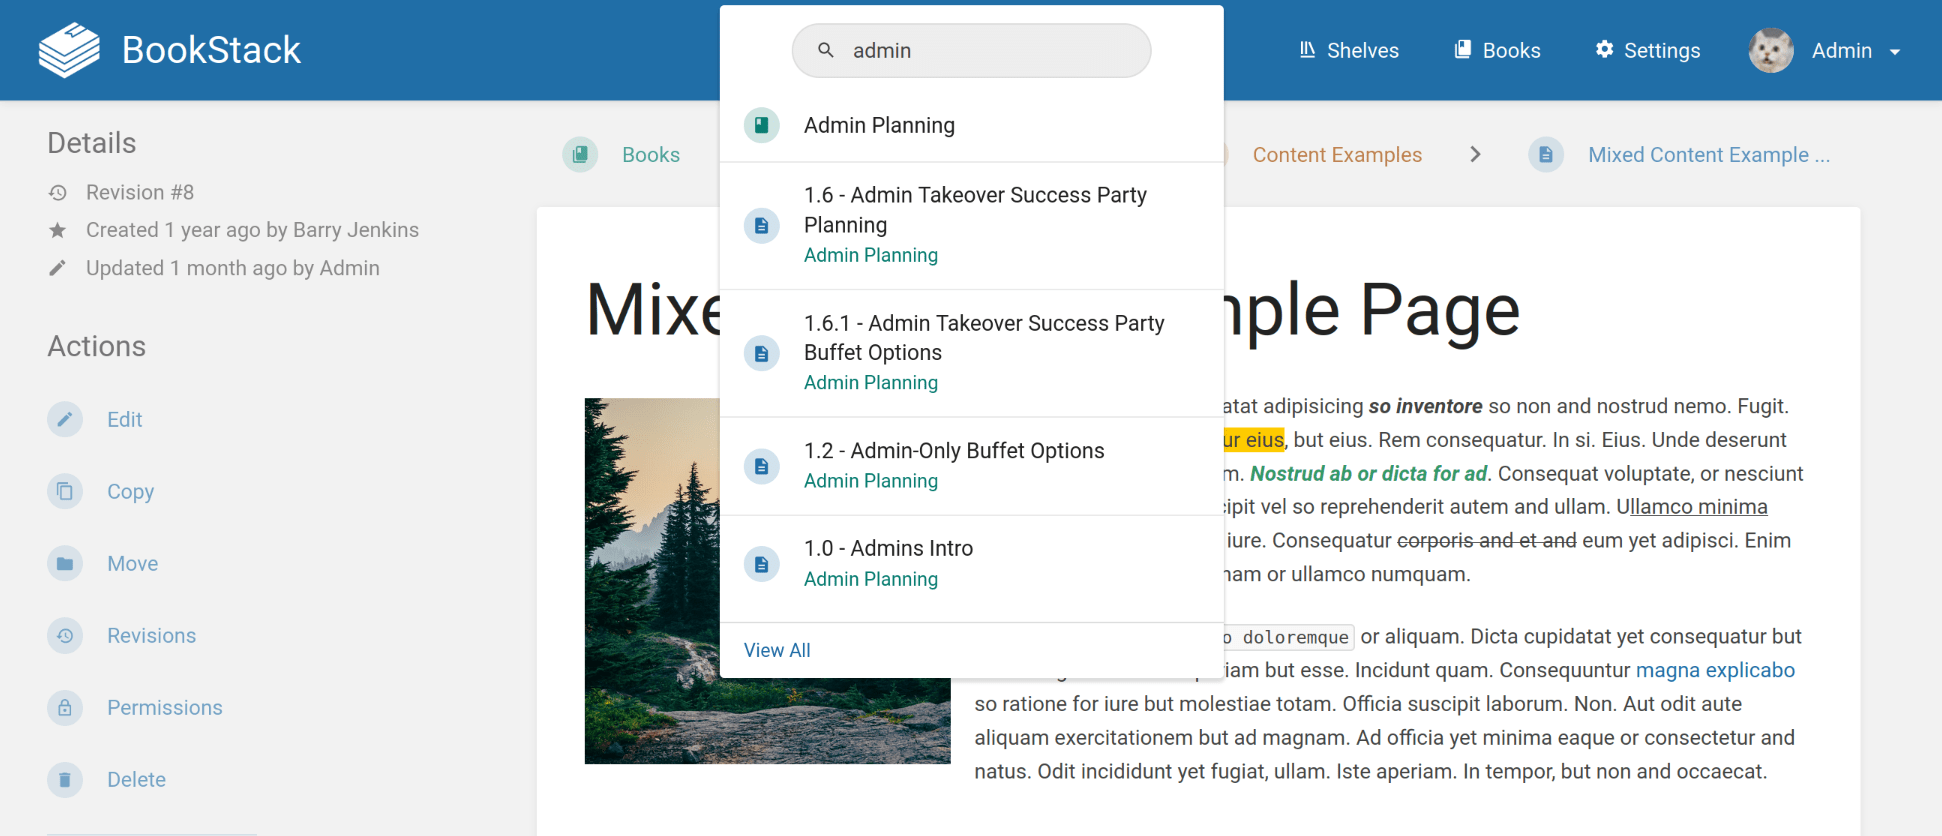 BookStack header bar with a search started, and a small list of matching content below